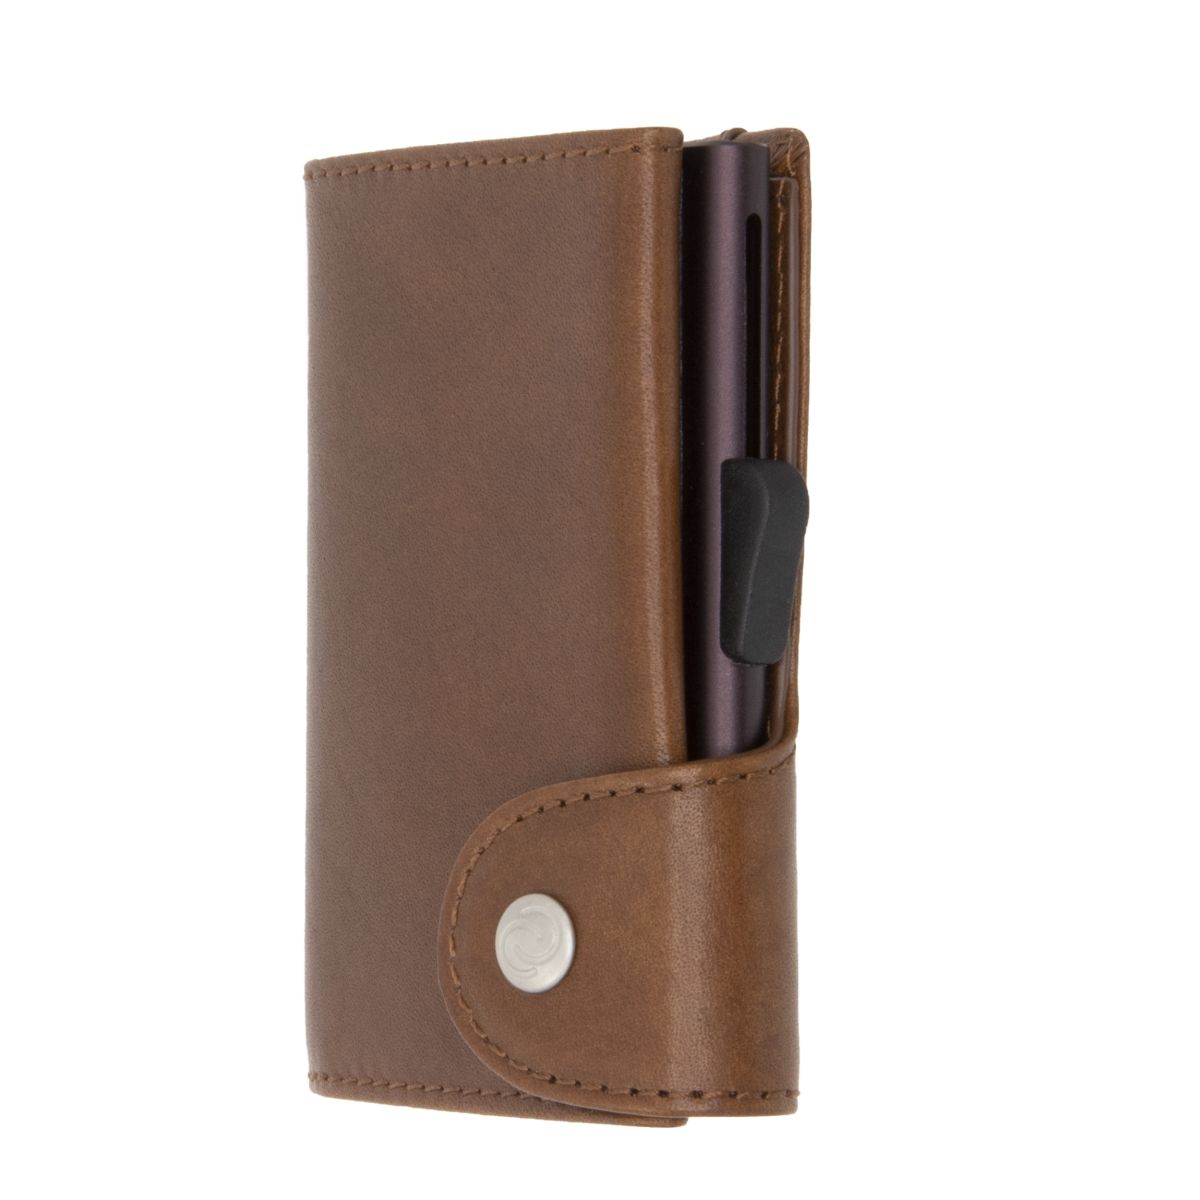 C-Secure Aluminum Card Holder with Genuine Leather - Brown